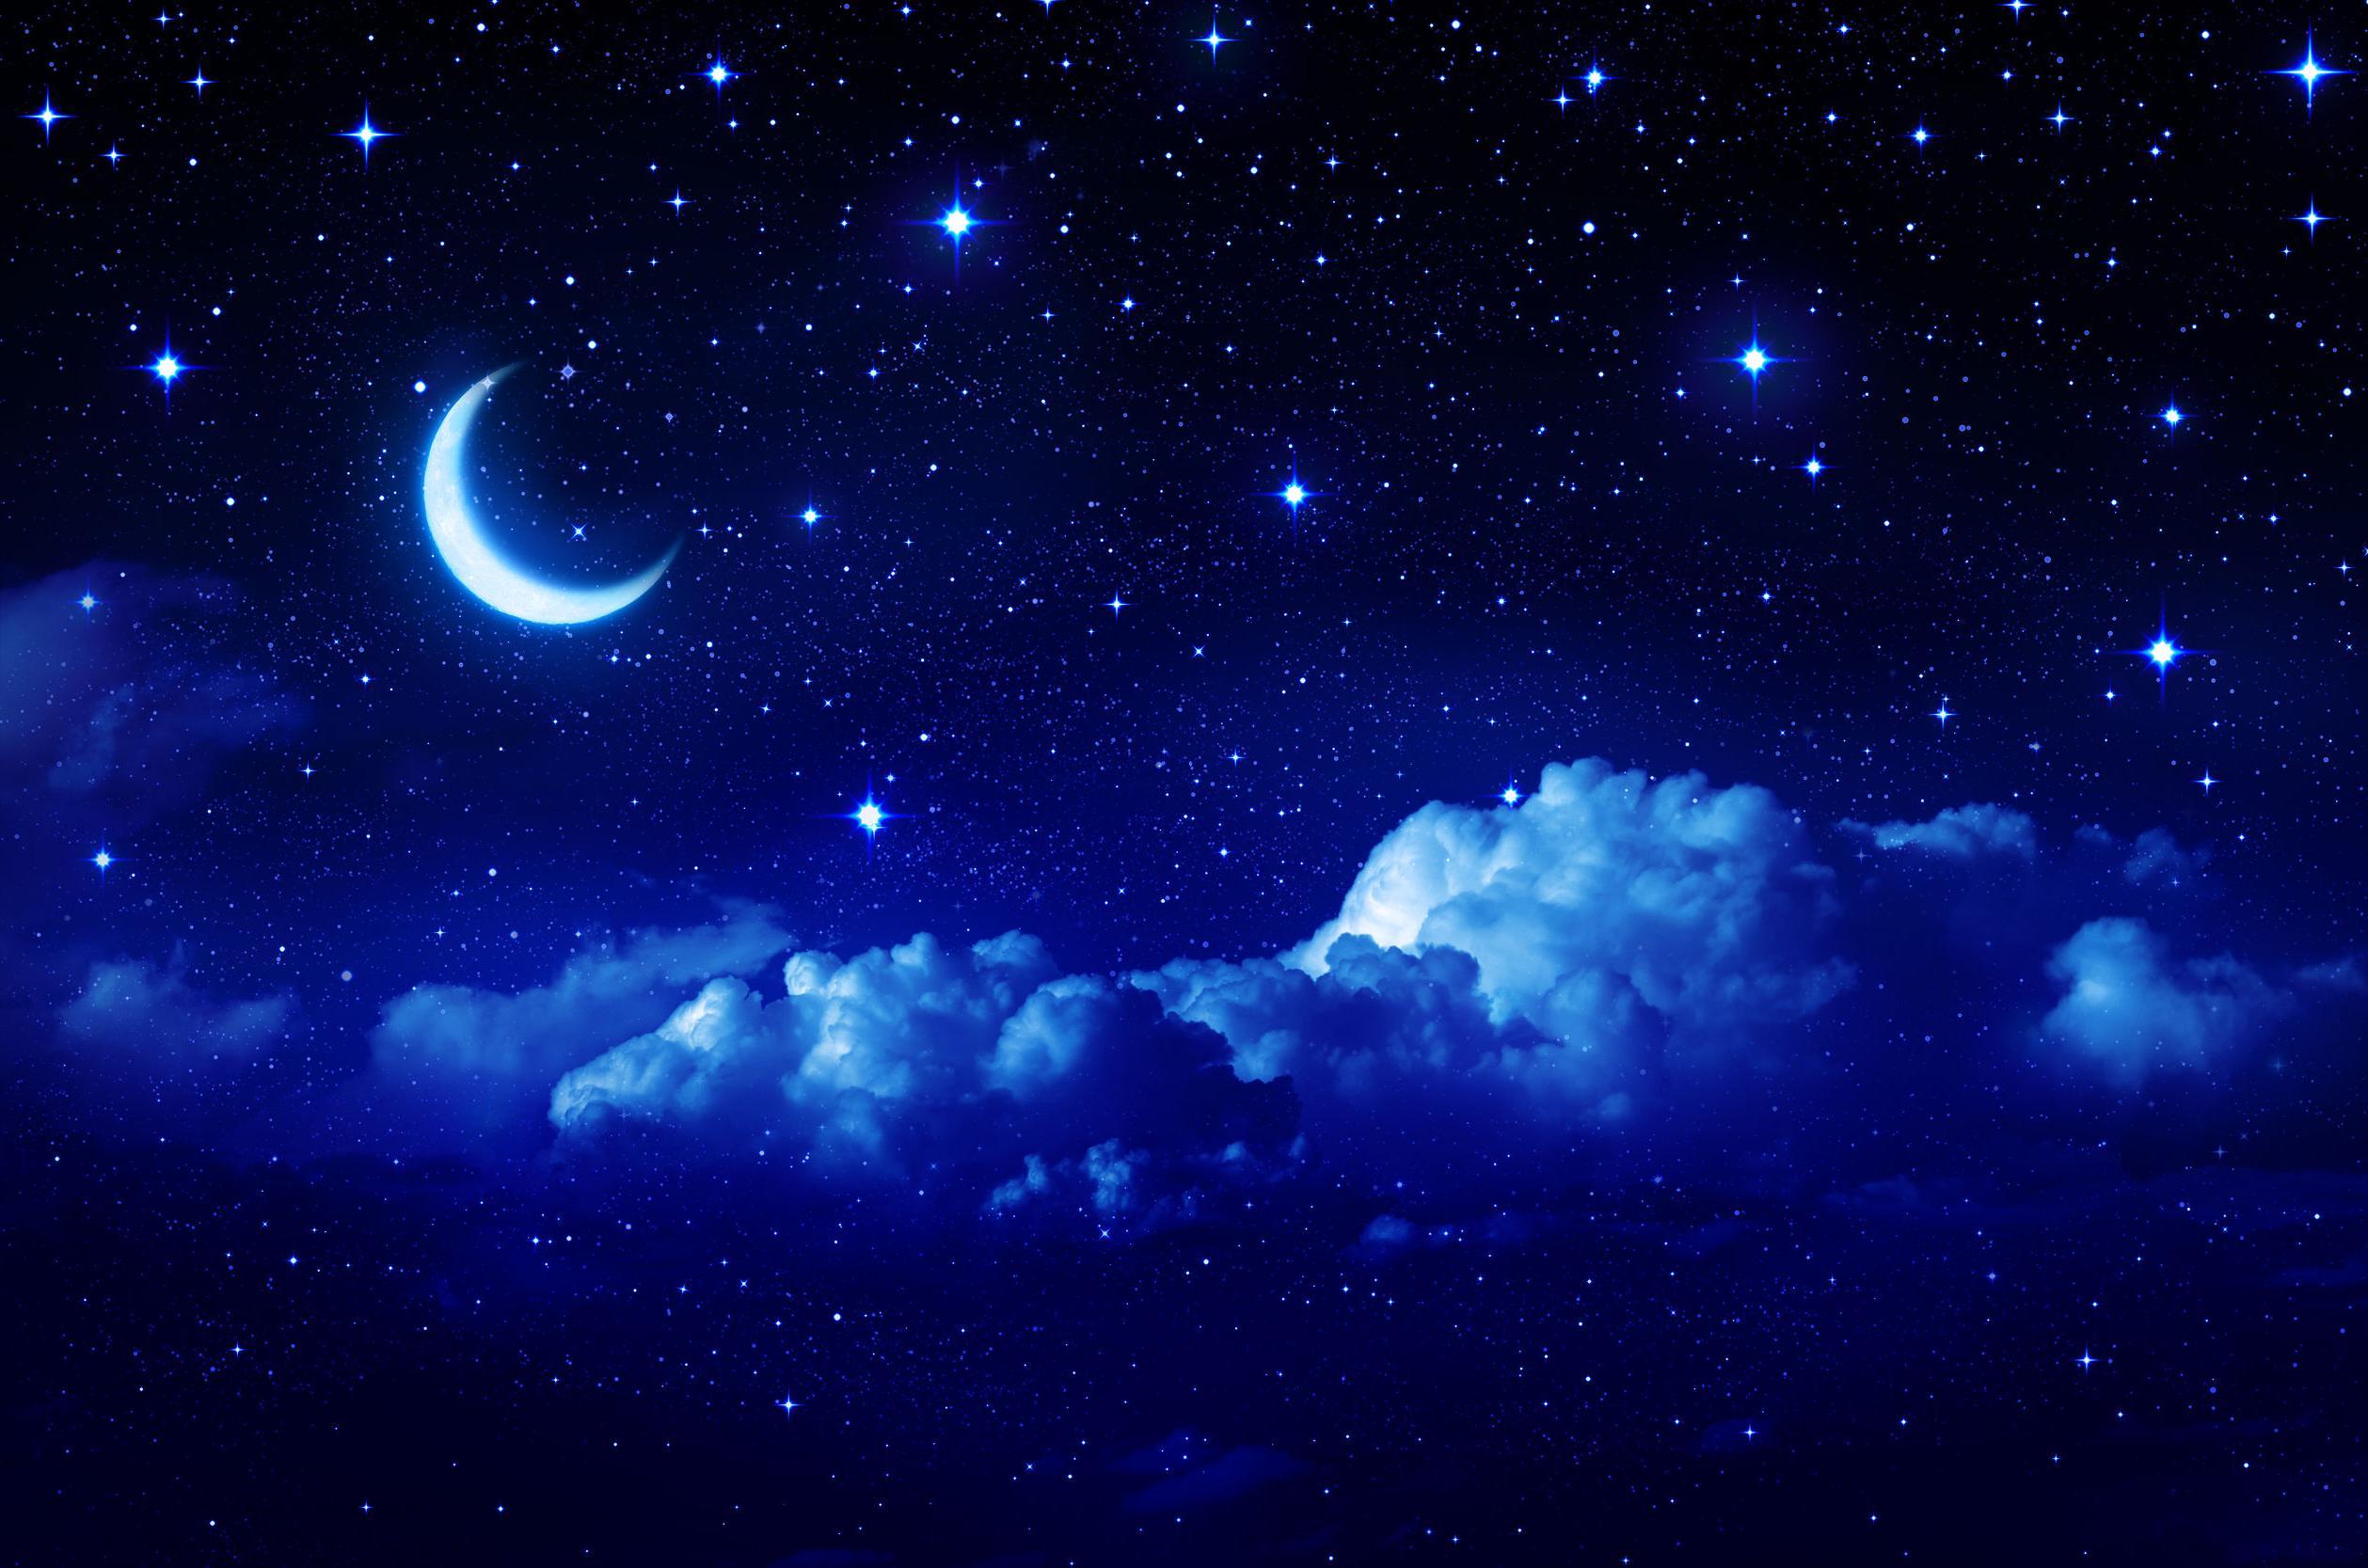 Best iPad 1 Background Picture Ever? A Beautiful Night Sky Image! | OSXDaily